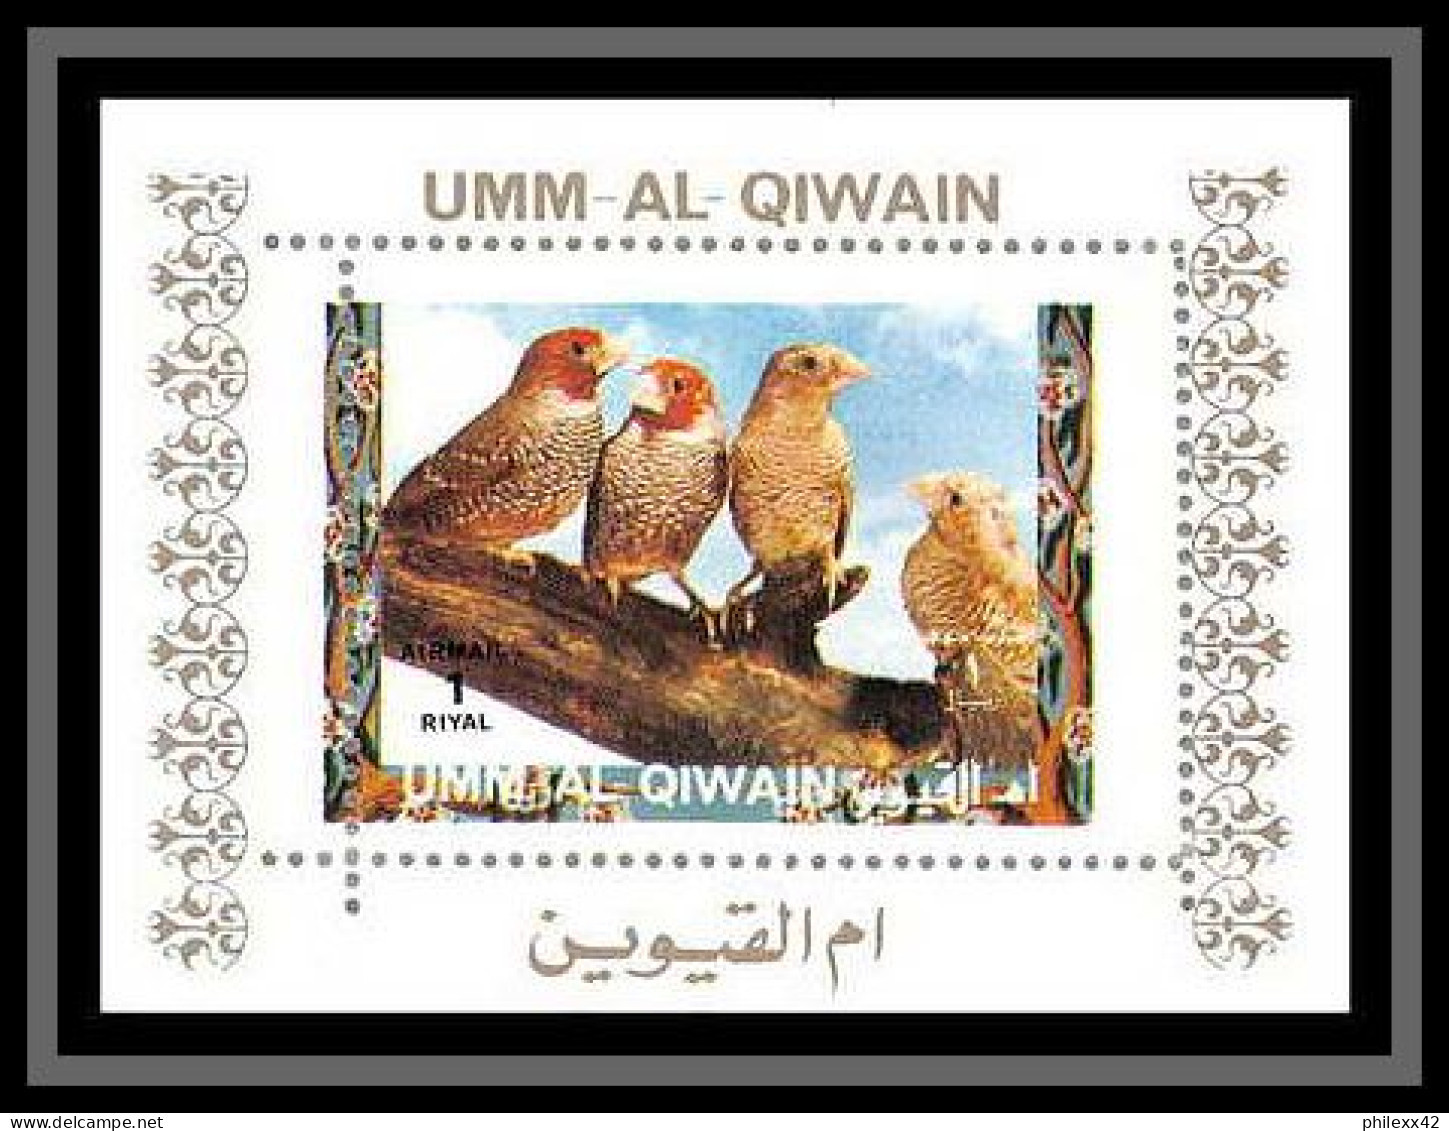 0057/ Umm Al Qiwain Deluxe Blocs ** MNH Michel N° 1402 / 1417 Parrots And Finches Oiseaux (birds) Tirage Blanc White - Papagayos